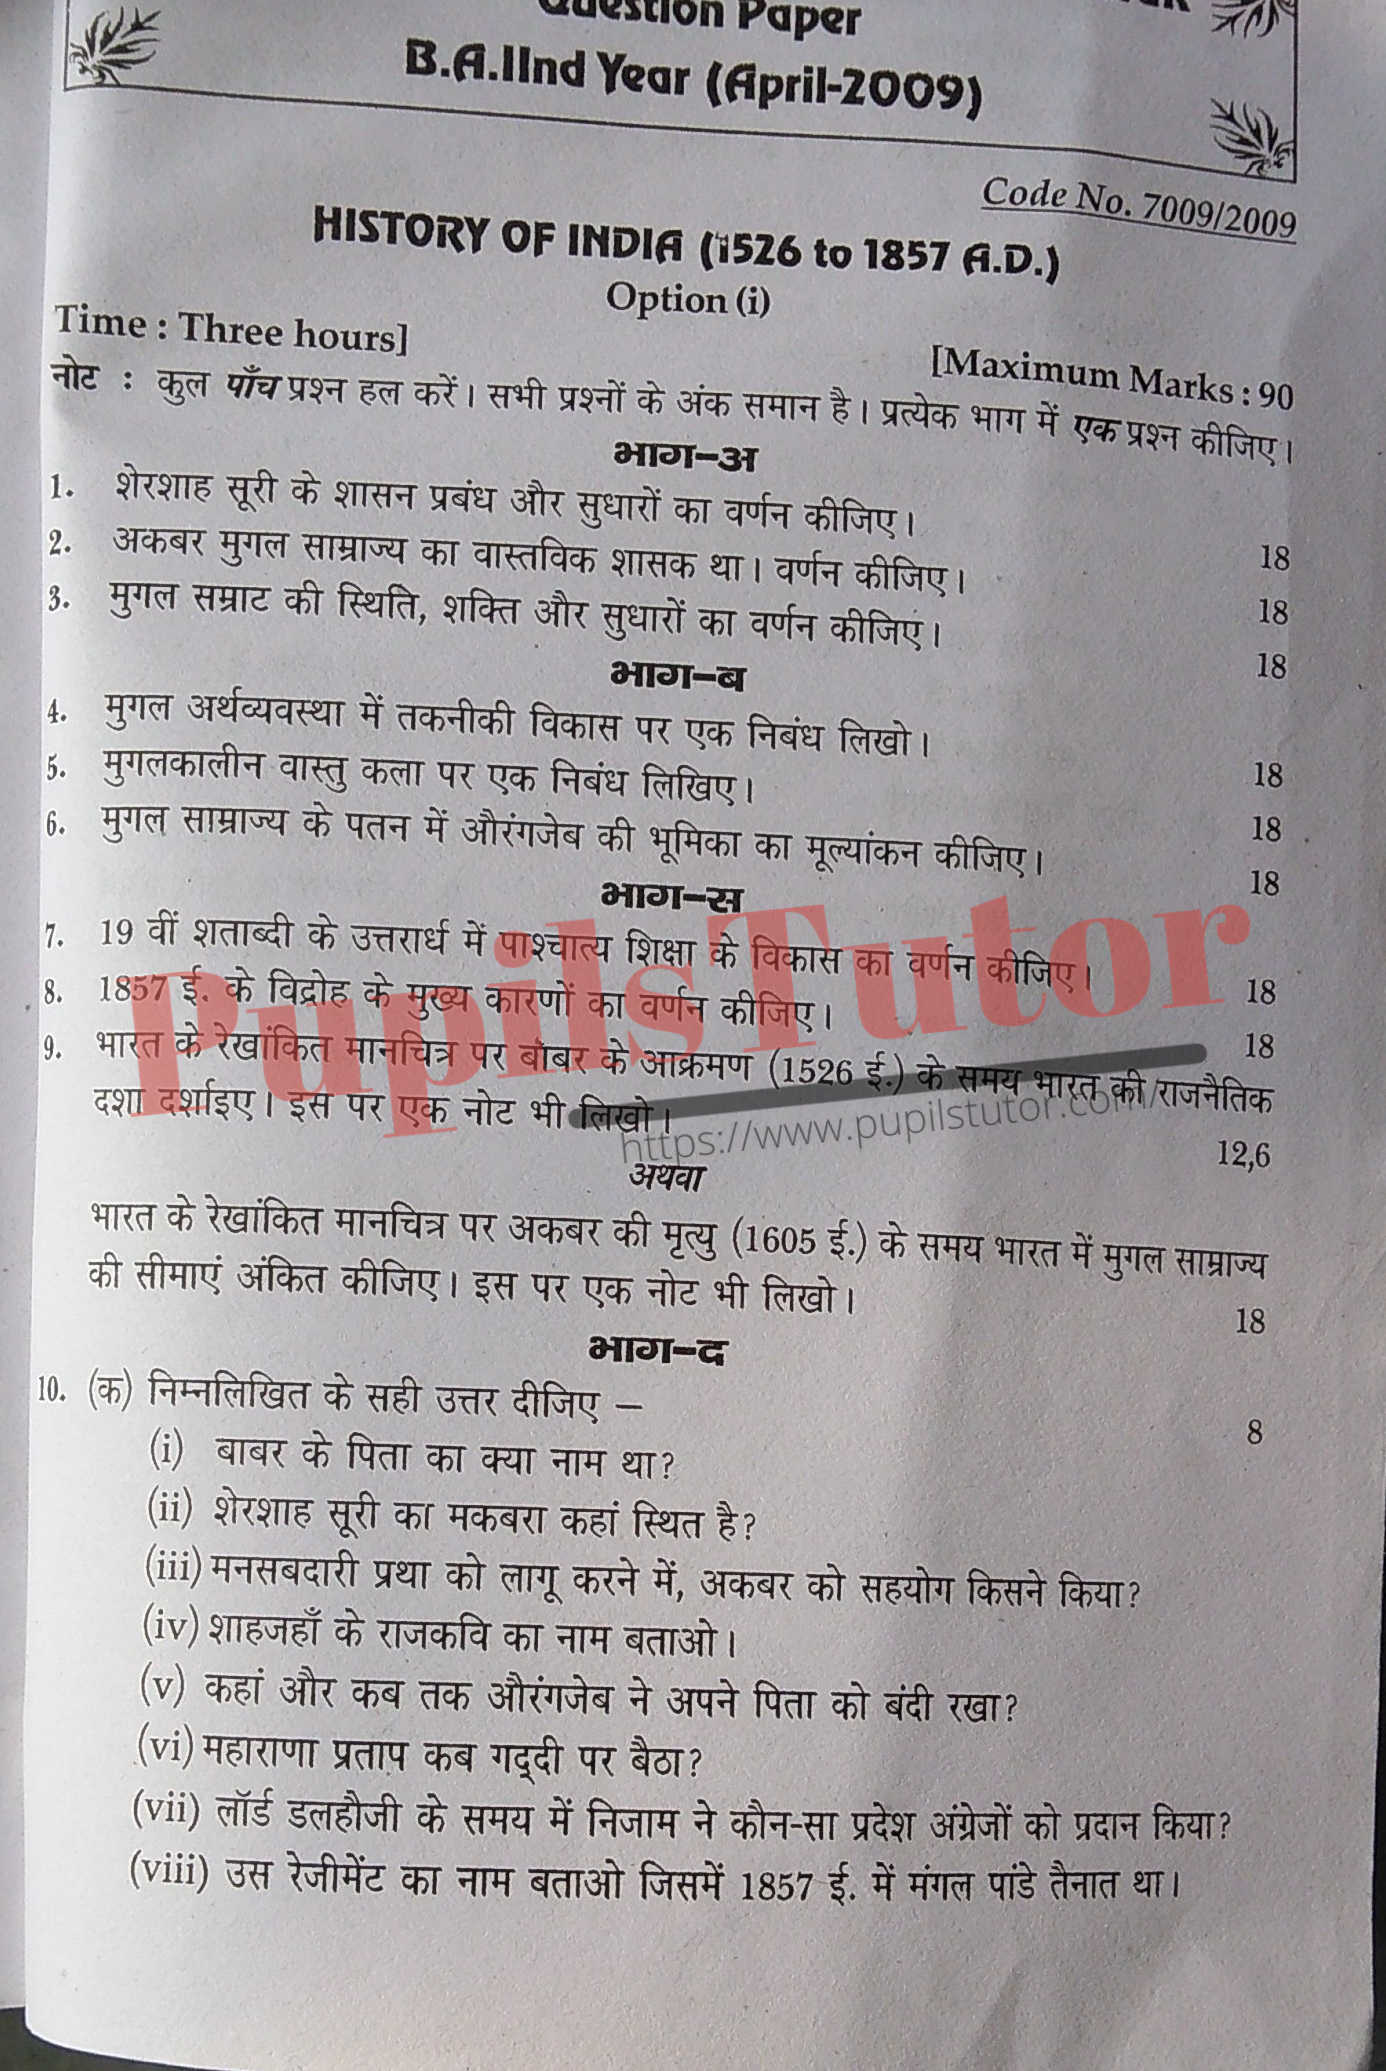 MDU (Maharshi Dayanand University, Rohtak Haryana) BA Pass And Honors Third Semester Previous Year History Question Paper For April, 2009 Exam (Question Paper Page 1) - pupilstutor.com